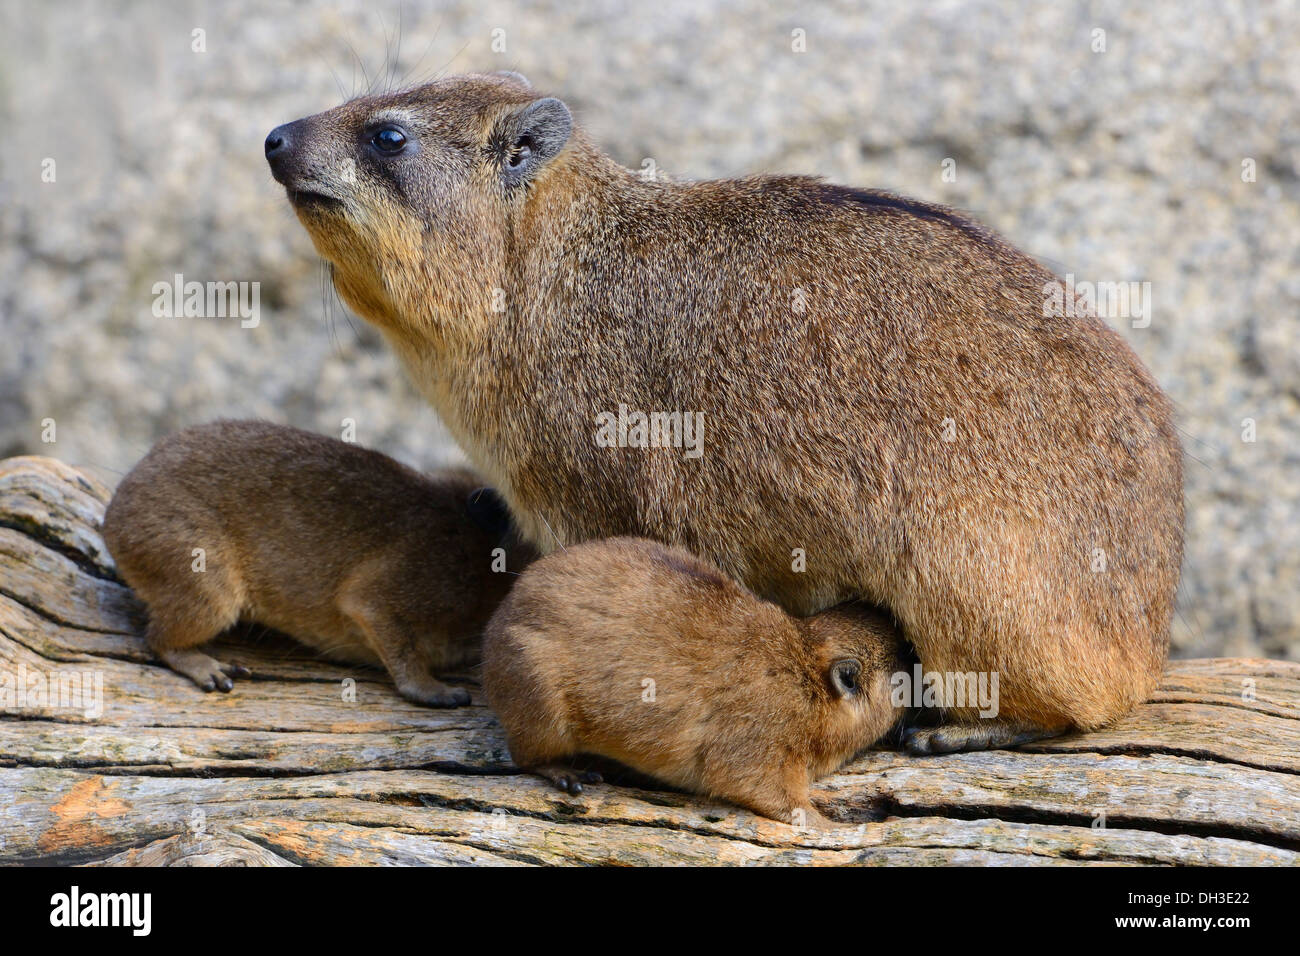 Rock Hyrax or Cape Hyrax (Procavia capensis) adult female with cubs, African species, captive, Stuttgart, Baden-Wuerttemberg Stock Photo